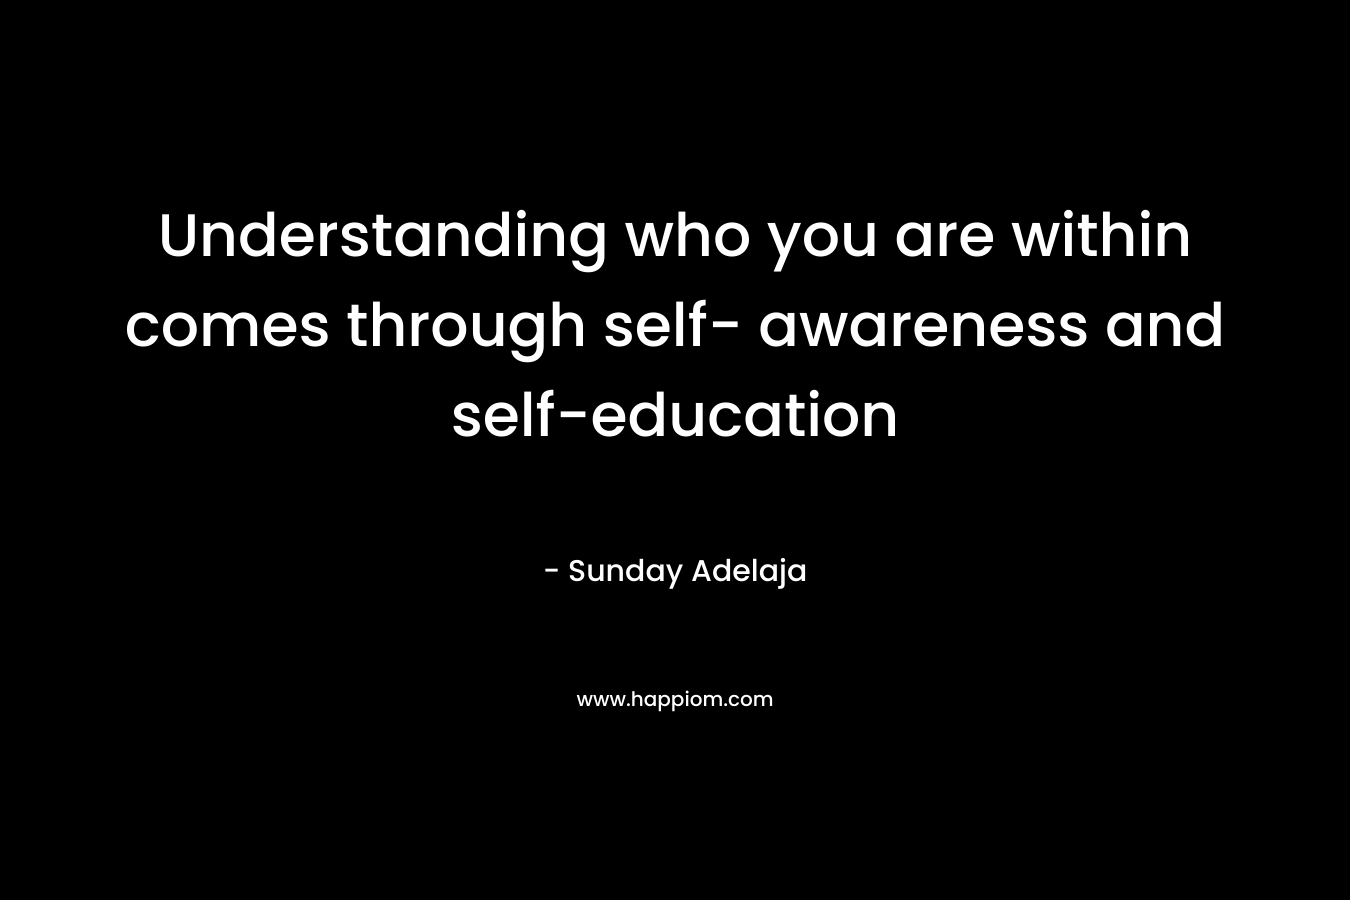 Understanding who you are within comes through self- awareness and self-education